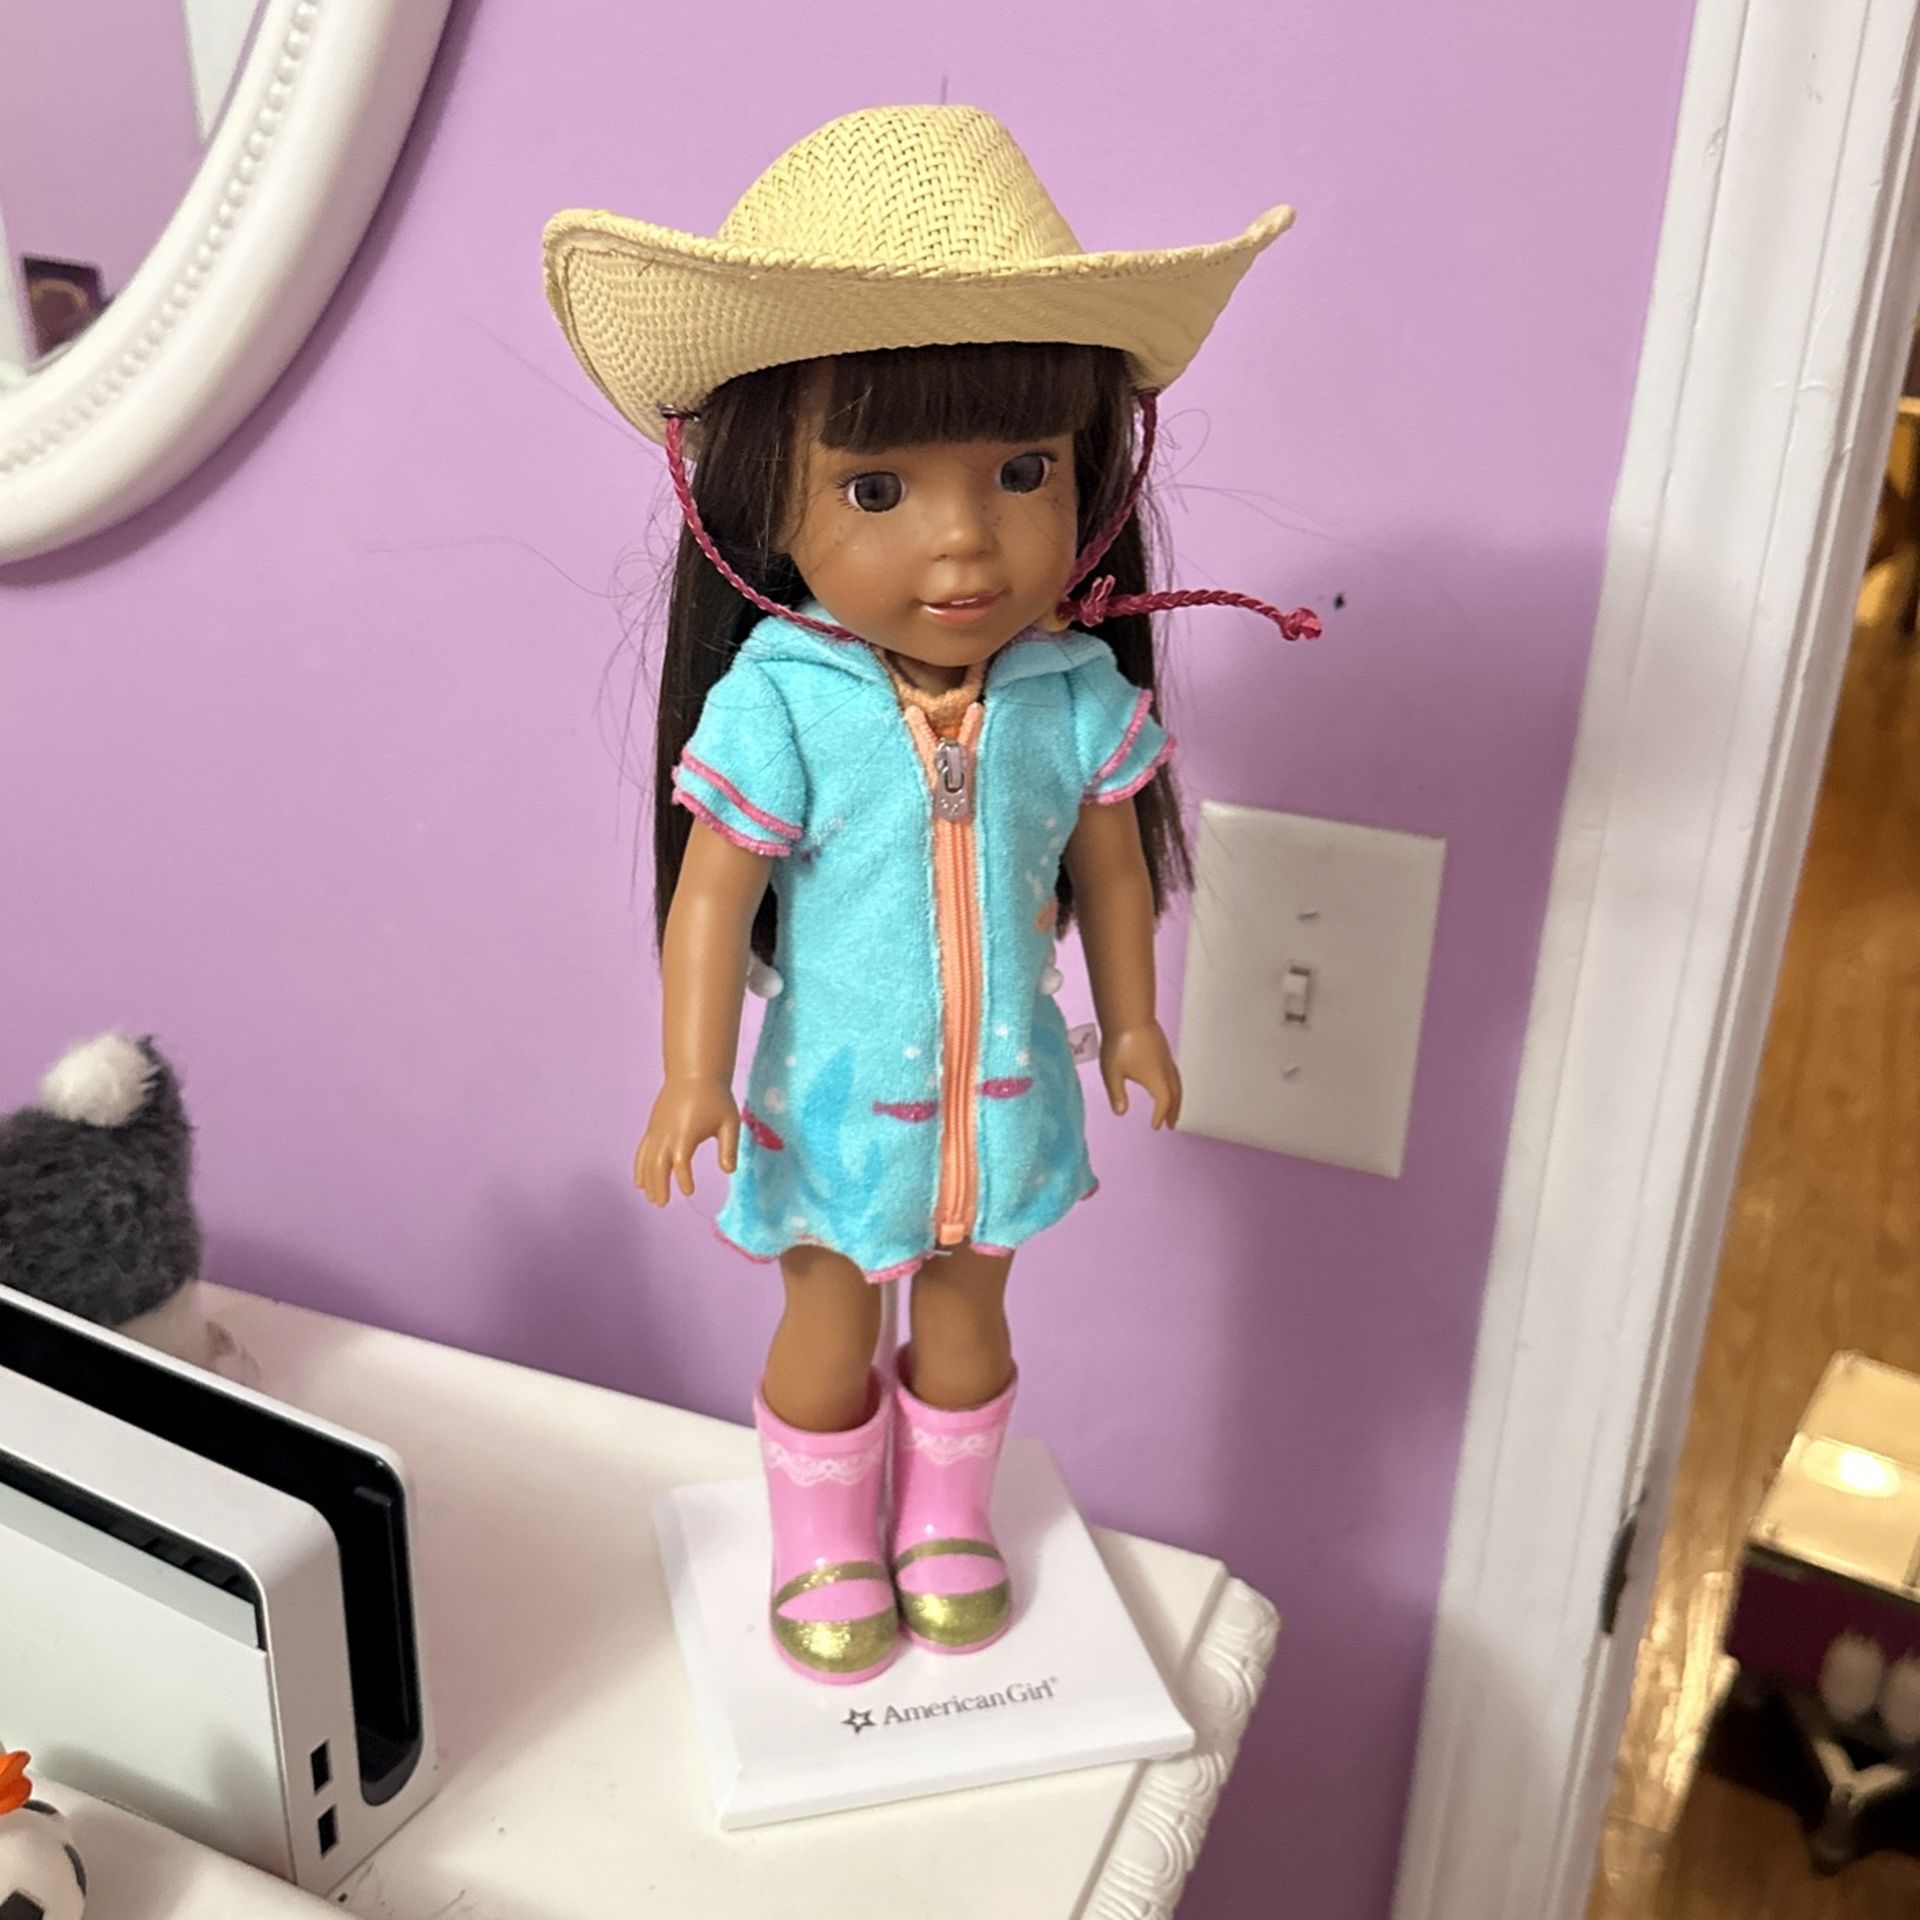 American Girl Doll Willie wisher